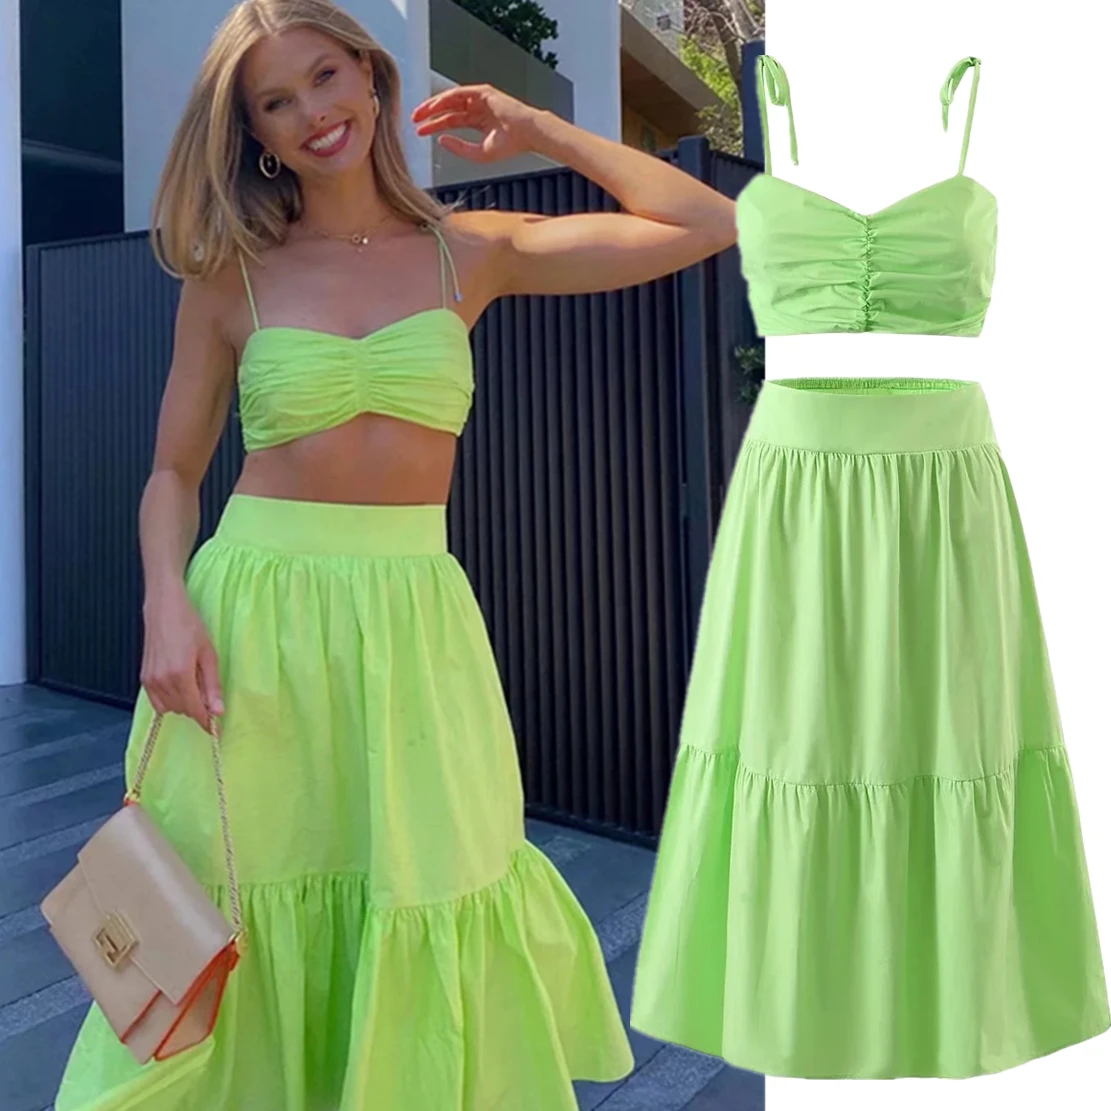 

Dave&Di High Wasit A-line Midi SKirts Sets Women Ins Fashion Blogger Vintage Fluorescent Green Pleated Camisole Short Tops